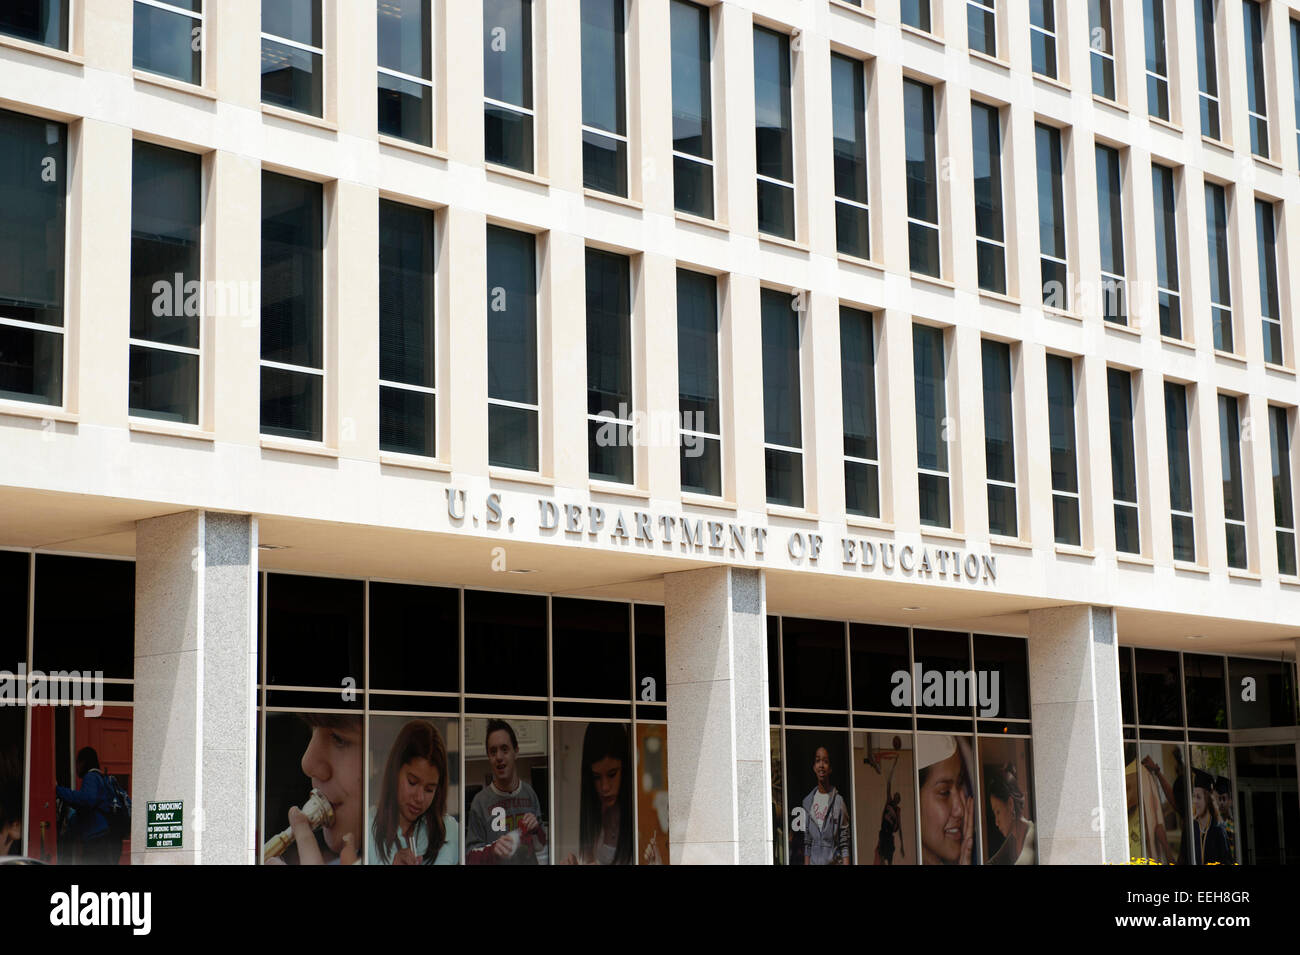 US Department of education building in Washington DC Stock Photo